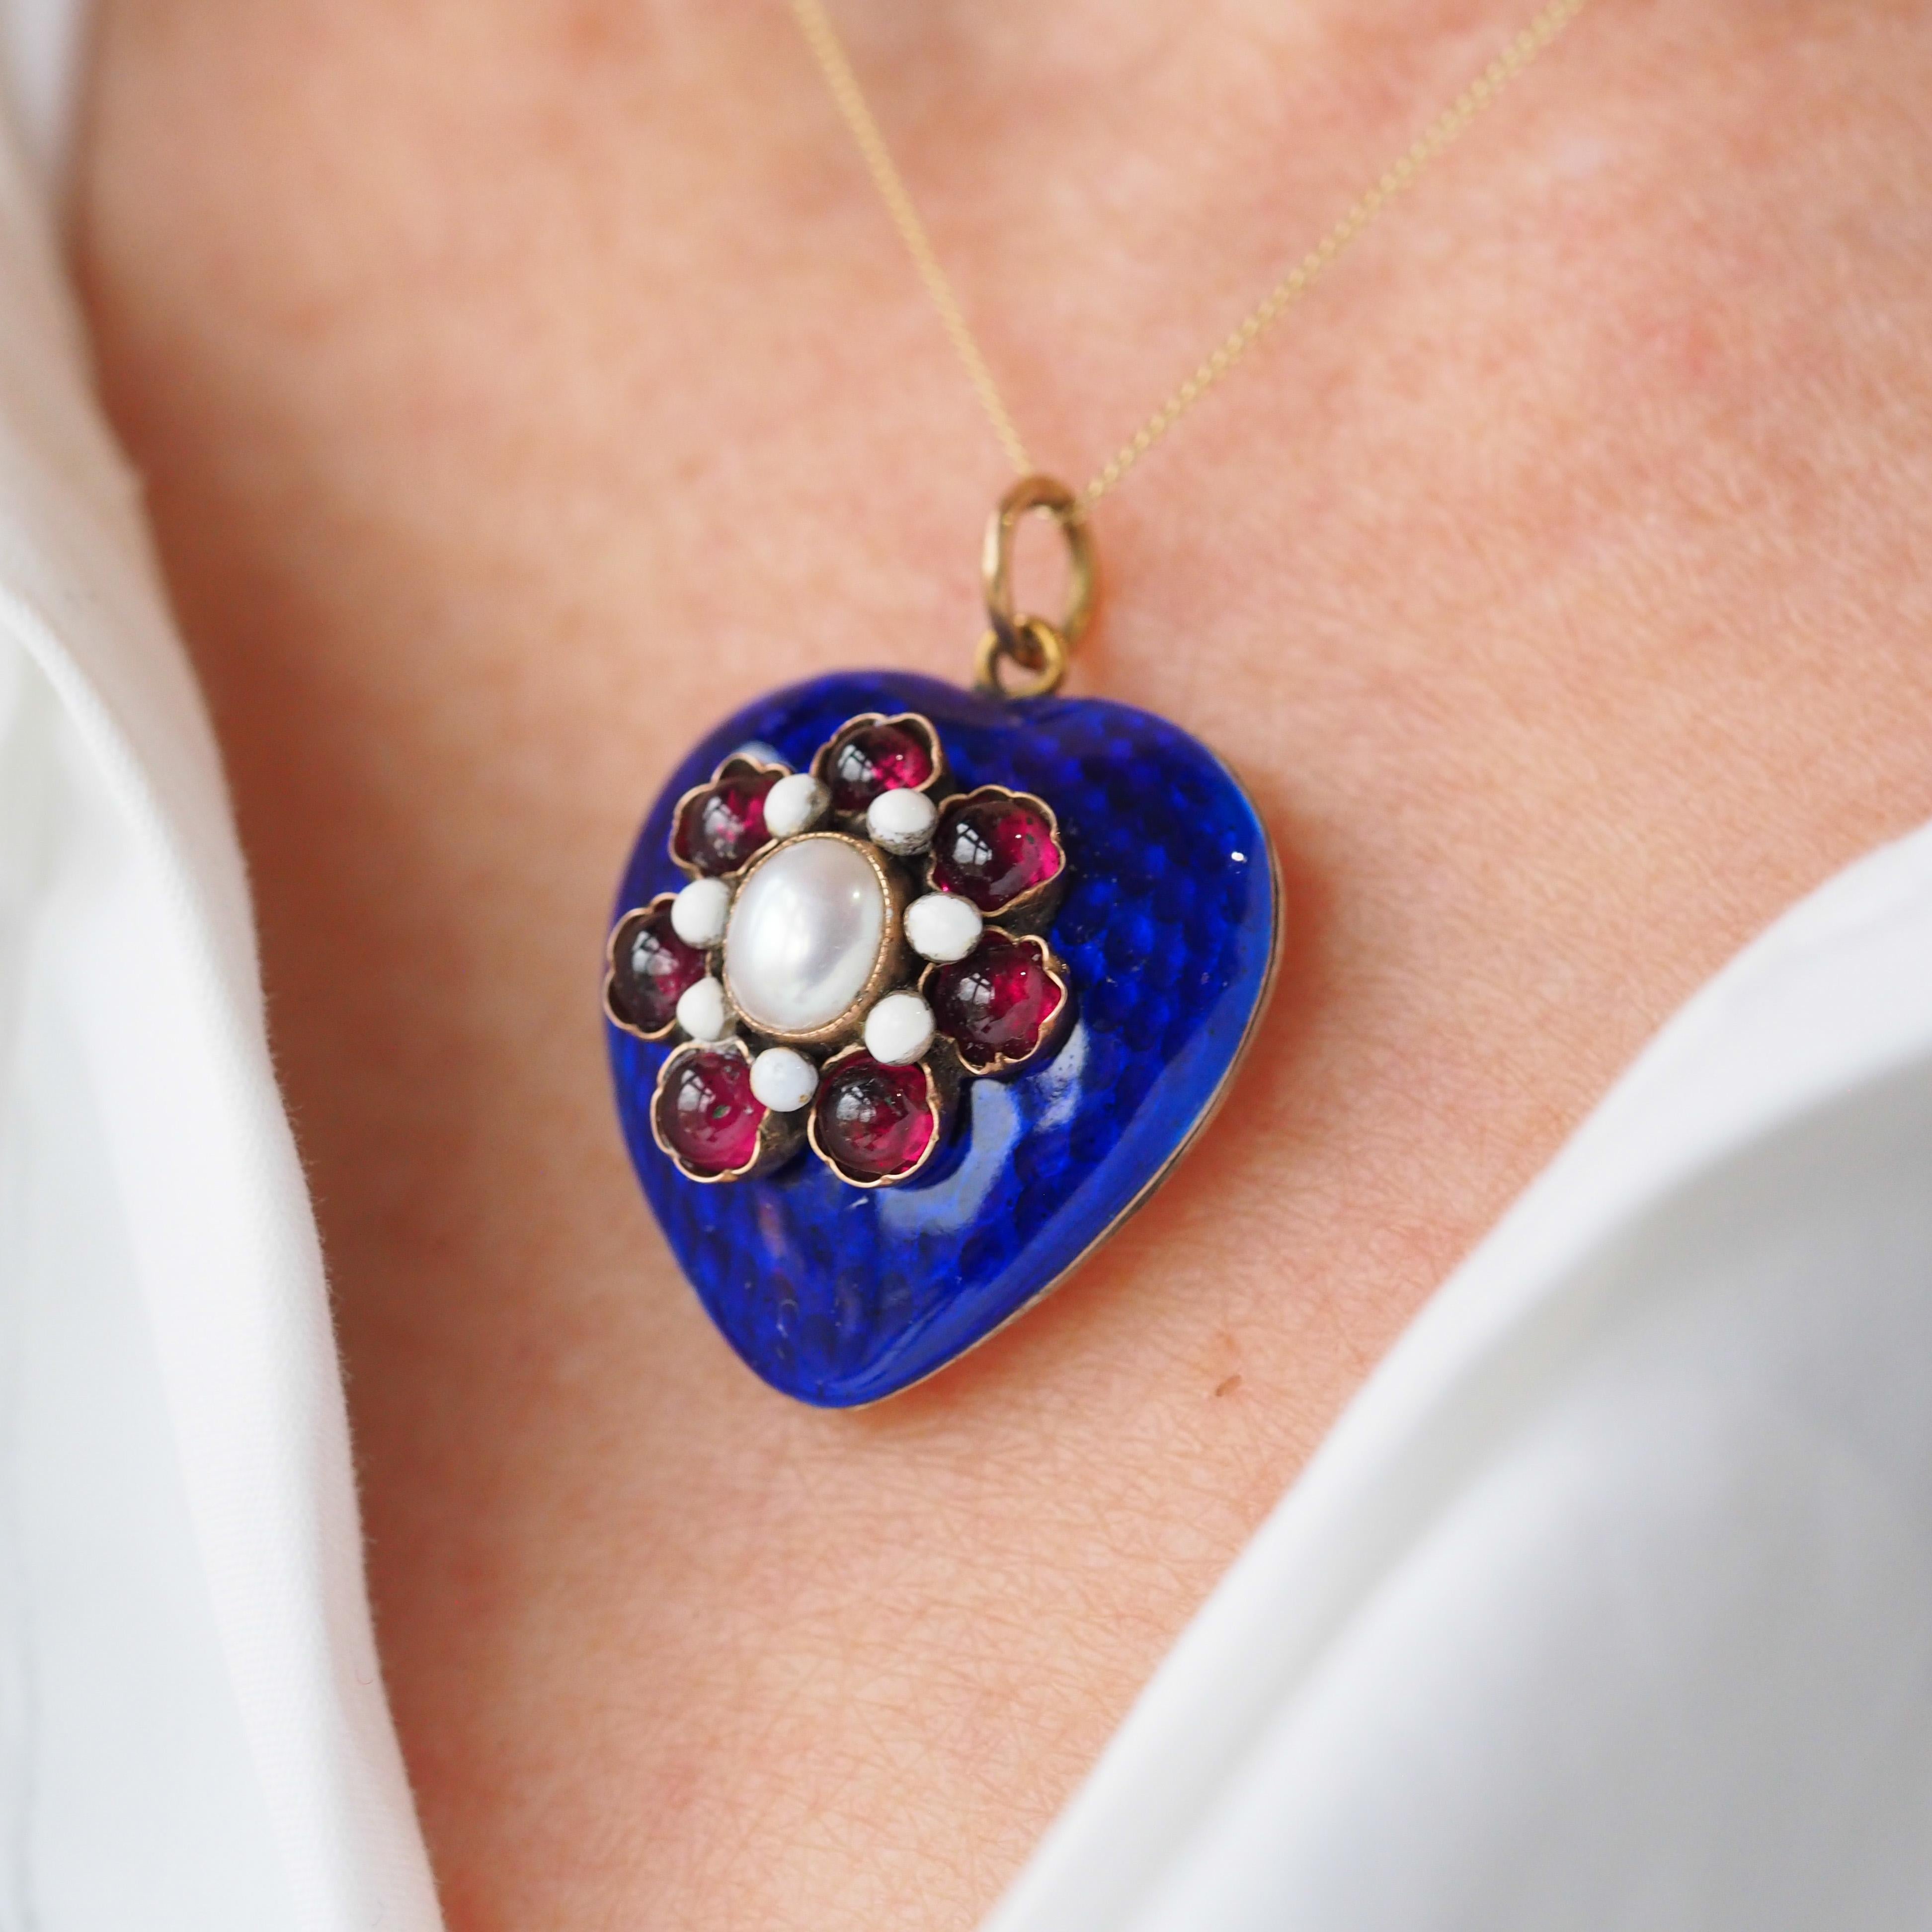 We are delighted to offer this adorable antique Victorian silver-gilt heart pendant made c.1900.
  
Captivating and enchanting upon first glance, this pendant features a rich royal blue coloured enamel on top of a textured (almost strawberry-like)